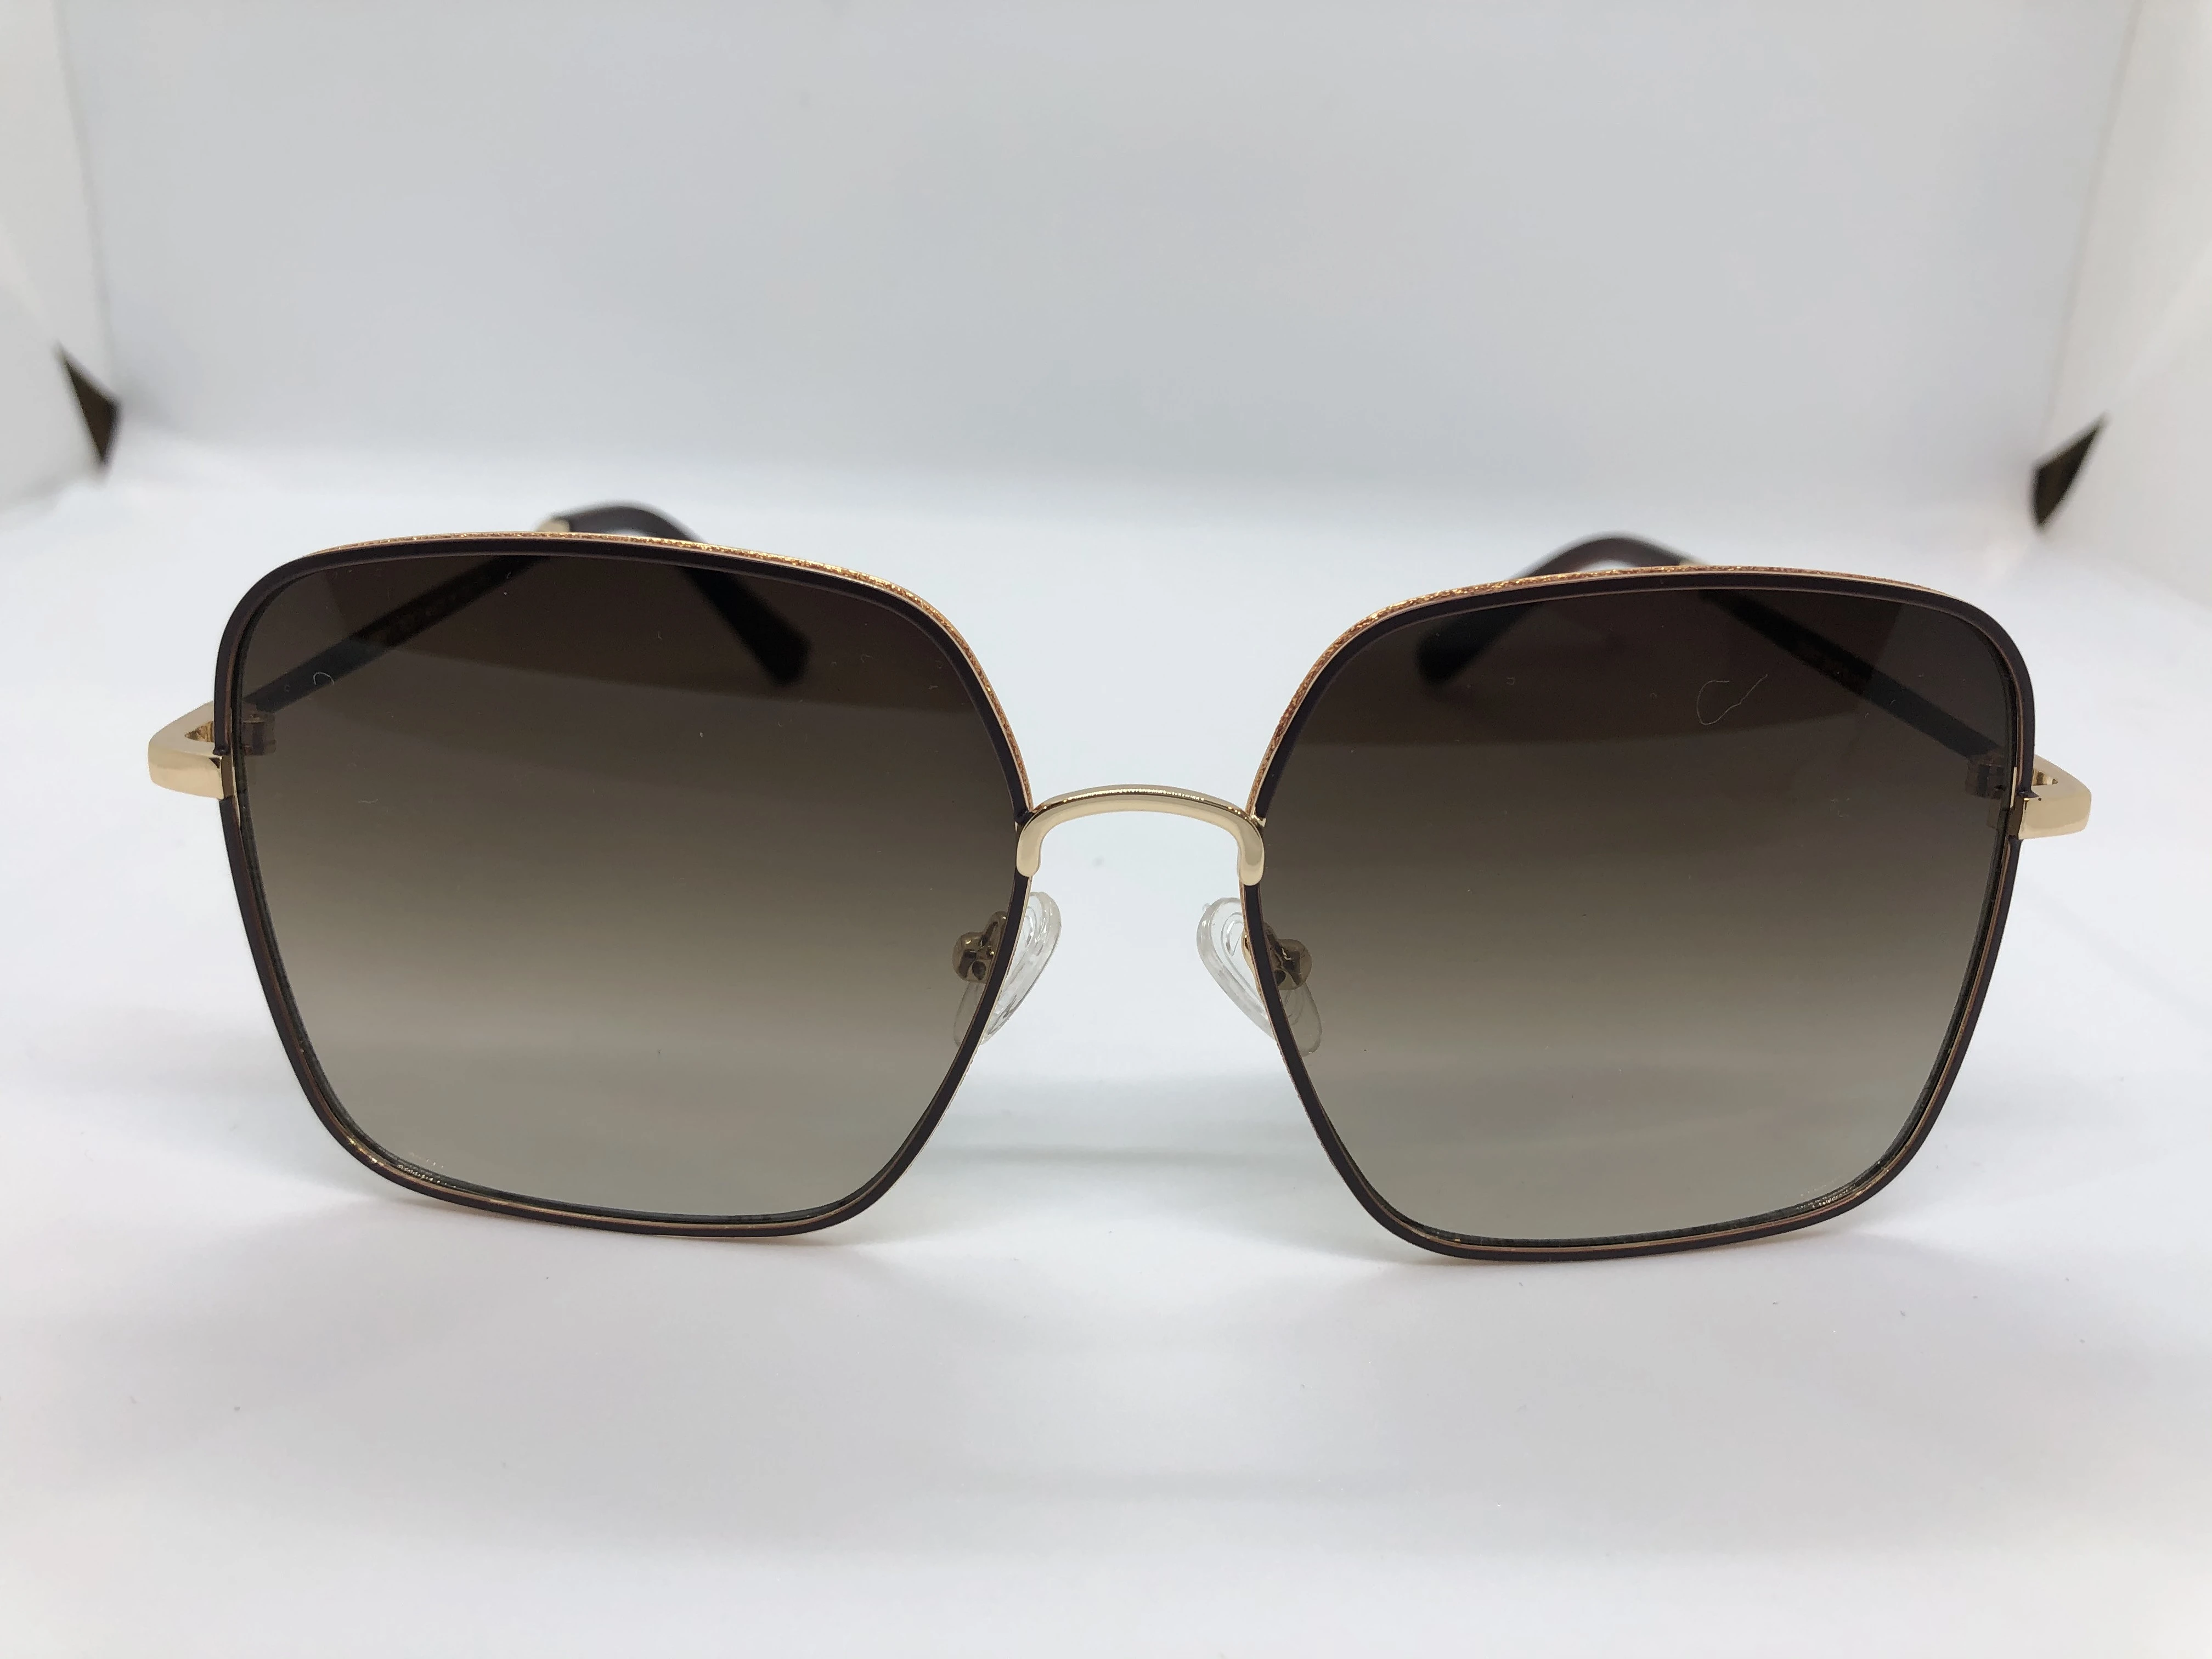 Sunglasses - Jimmy Choo - with a golden metal frame - light green gradient lenses - golden metal and dark brown polycarbonate armor - for women